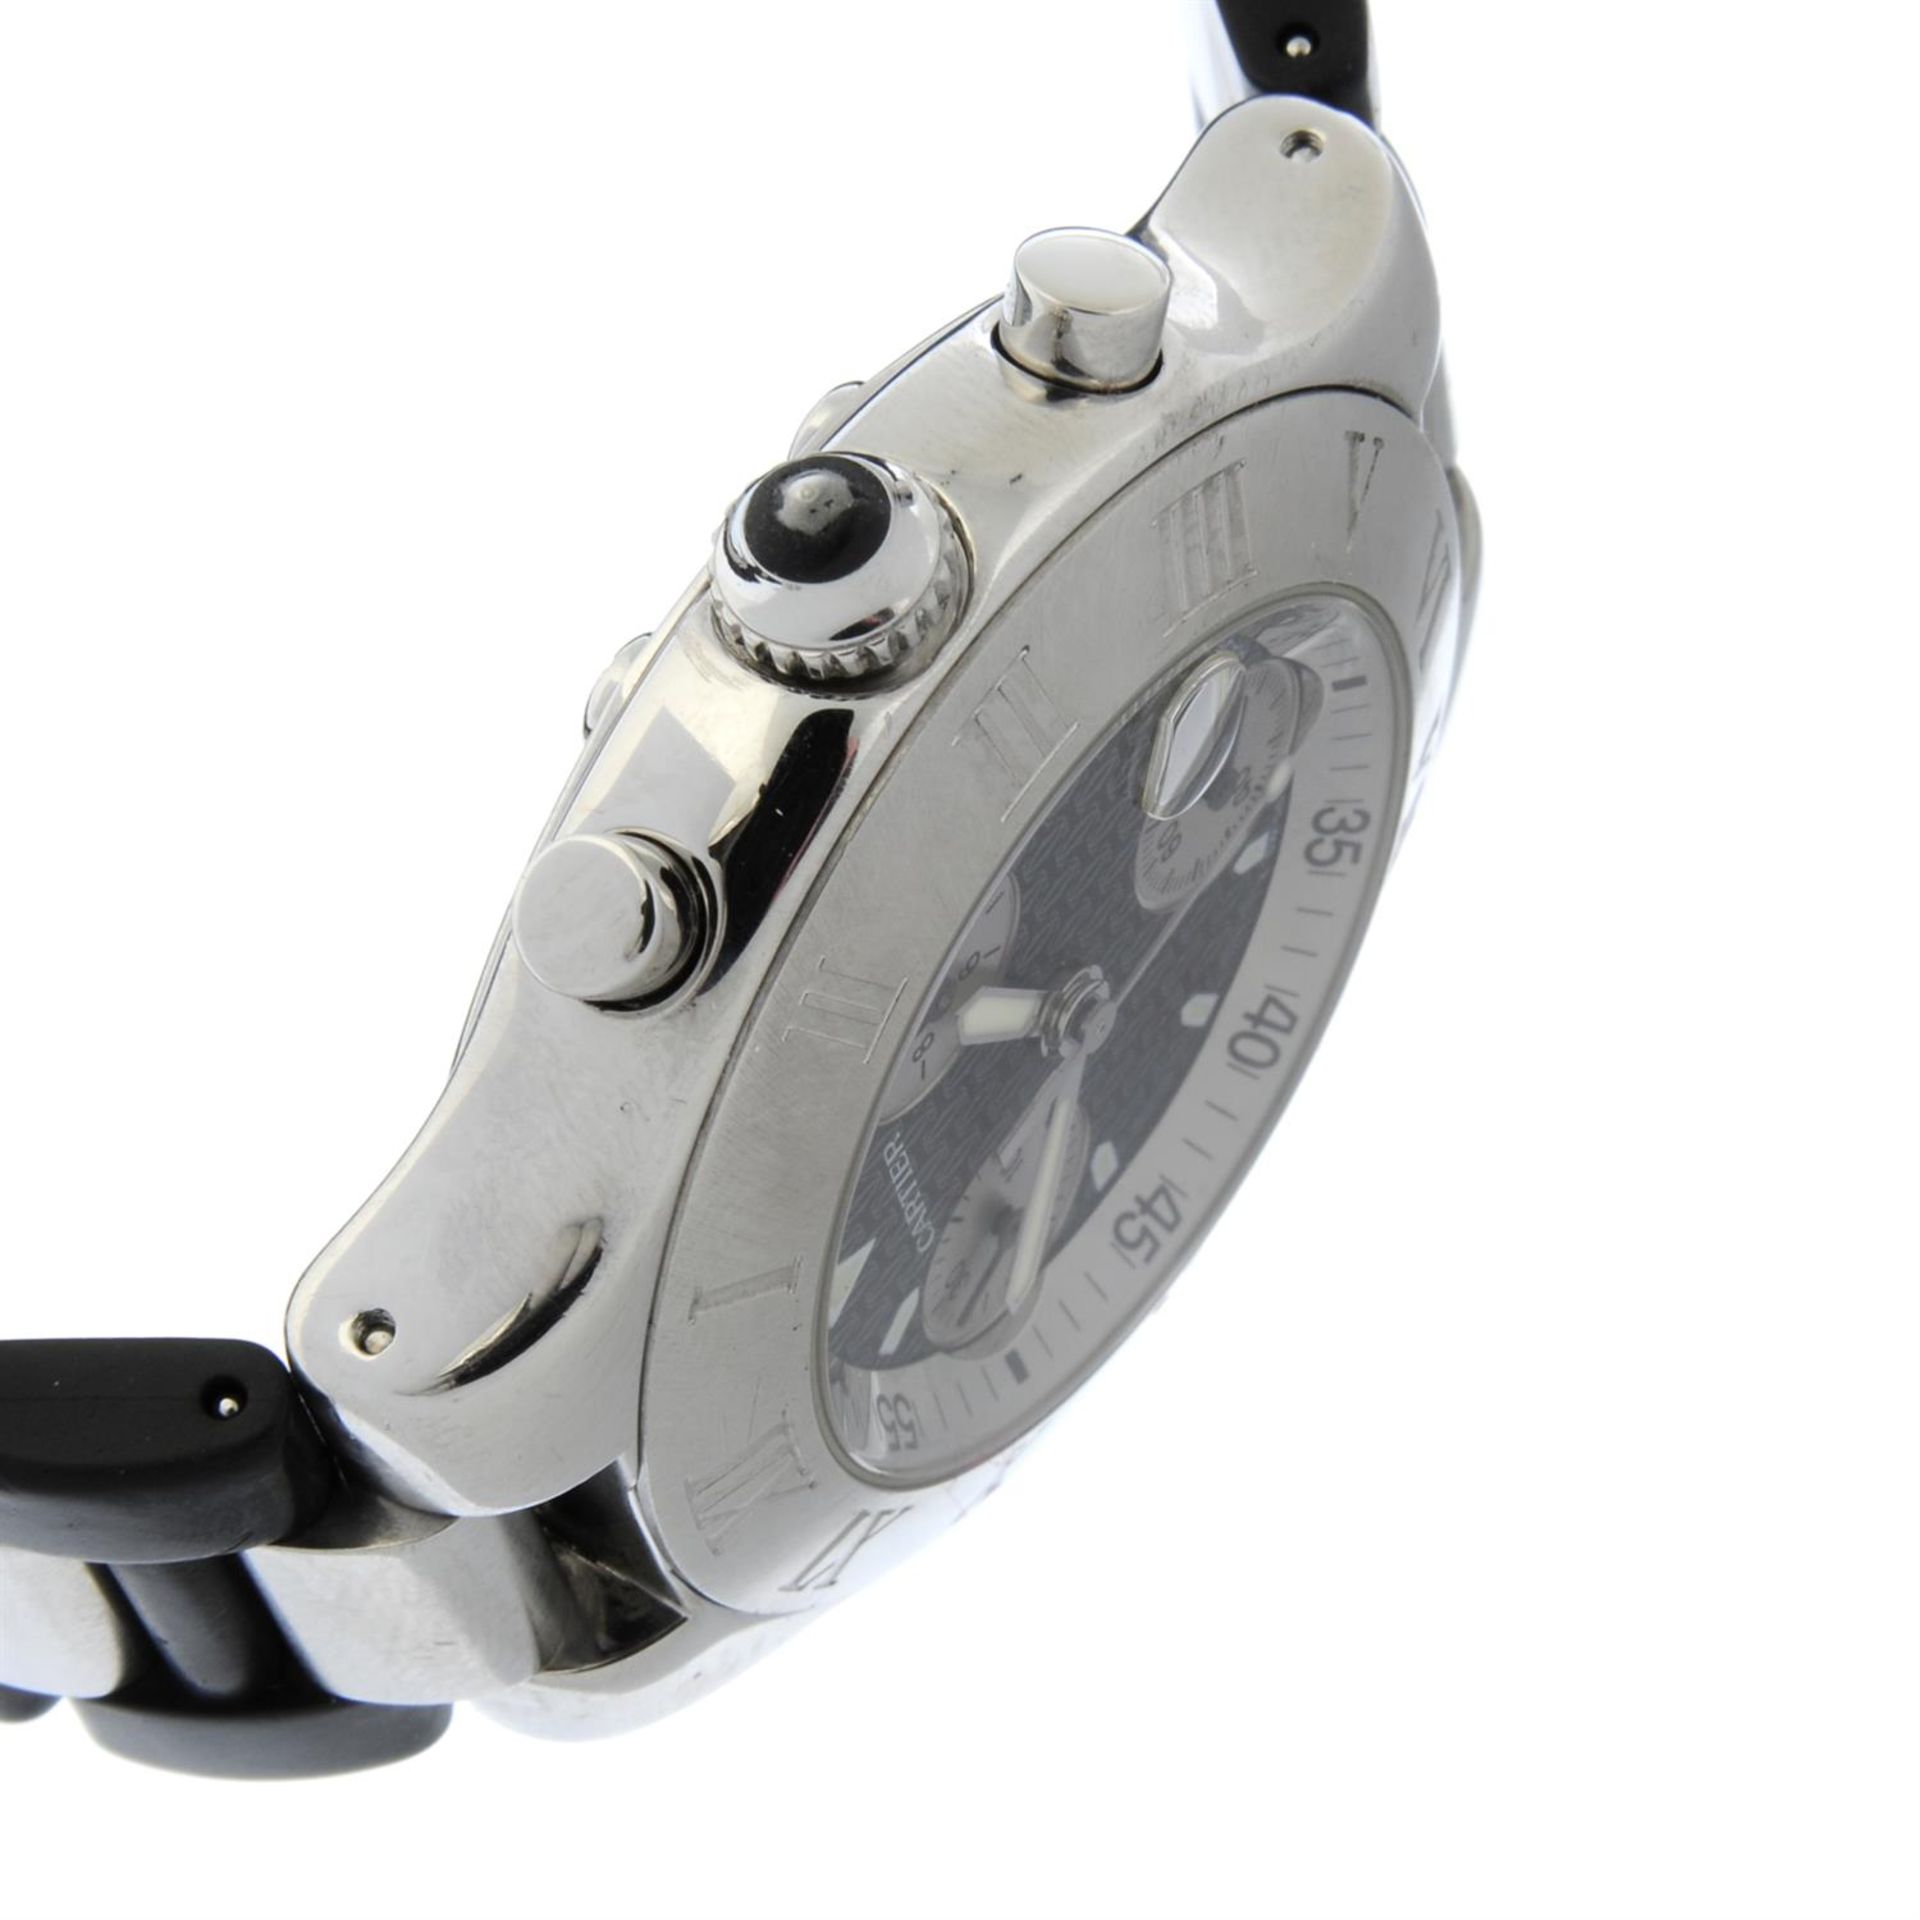 CARTIER - a stainless steel Chronoscaph 21 chronograph bracelet watch, 38mm. - Image 3 of 6